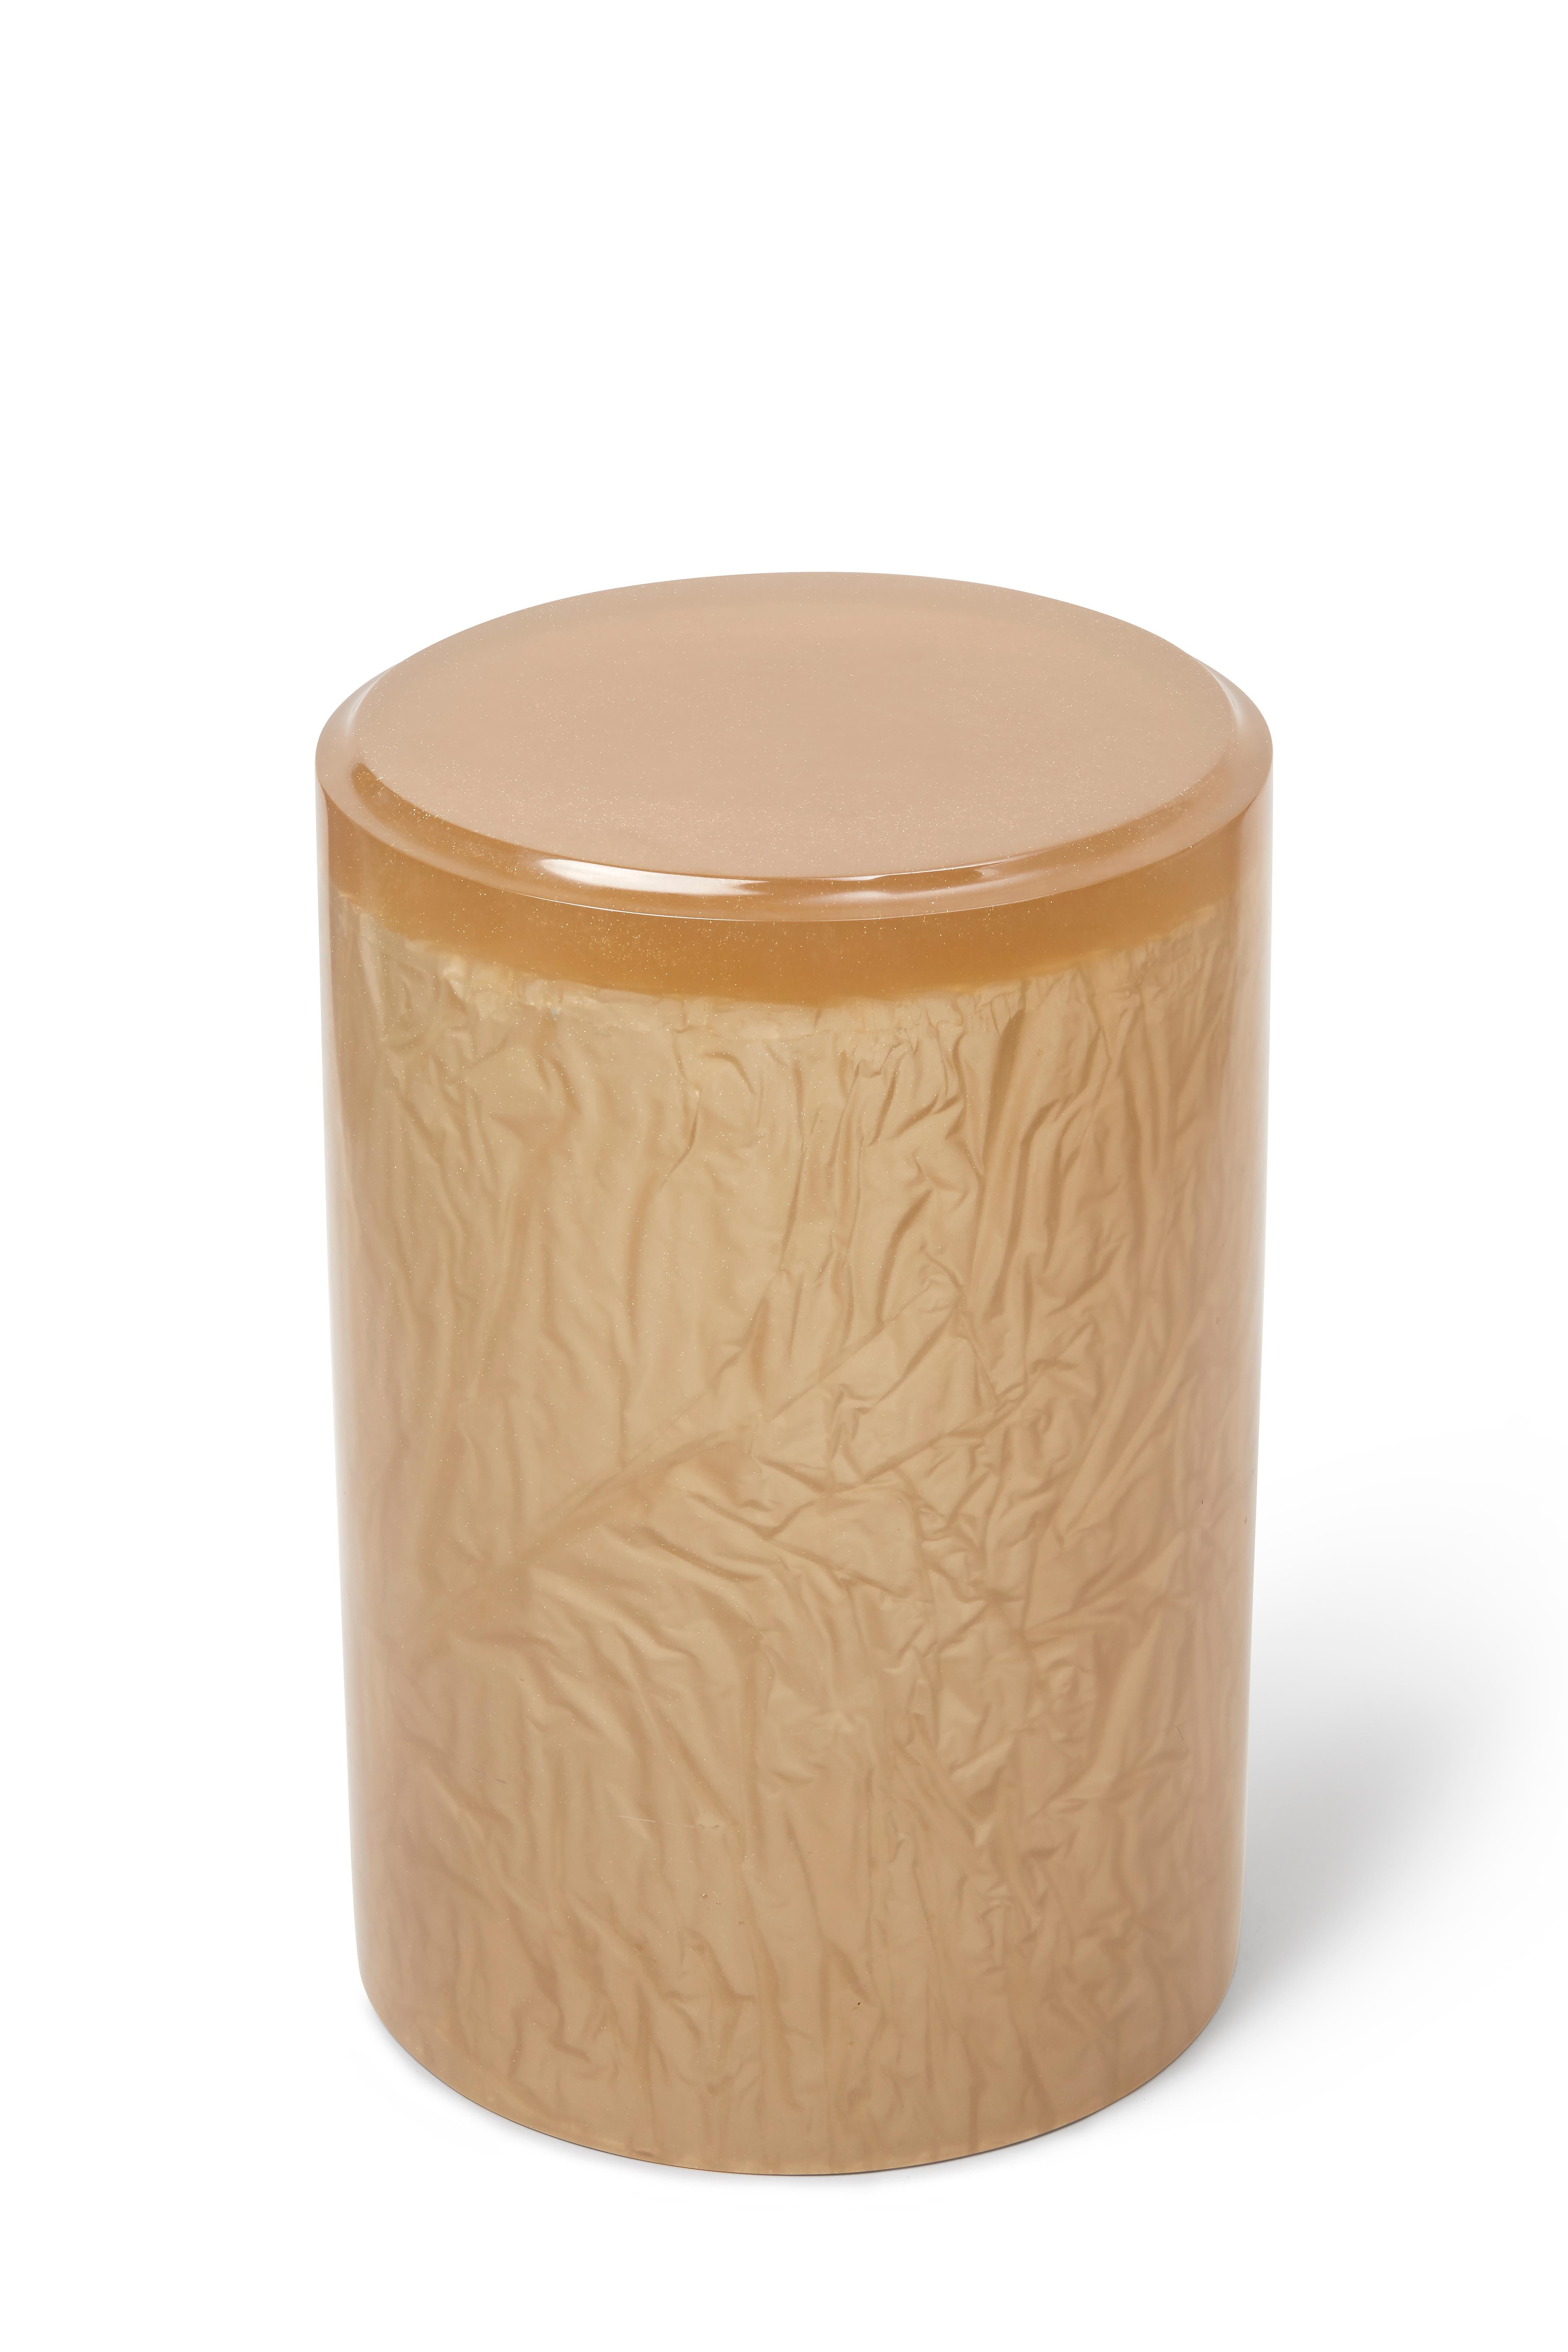 Cast Contemporary Resin Acrylic Side Table or Stool by Natalie Tredgett, gloss, Gold